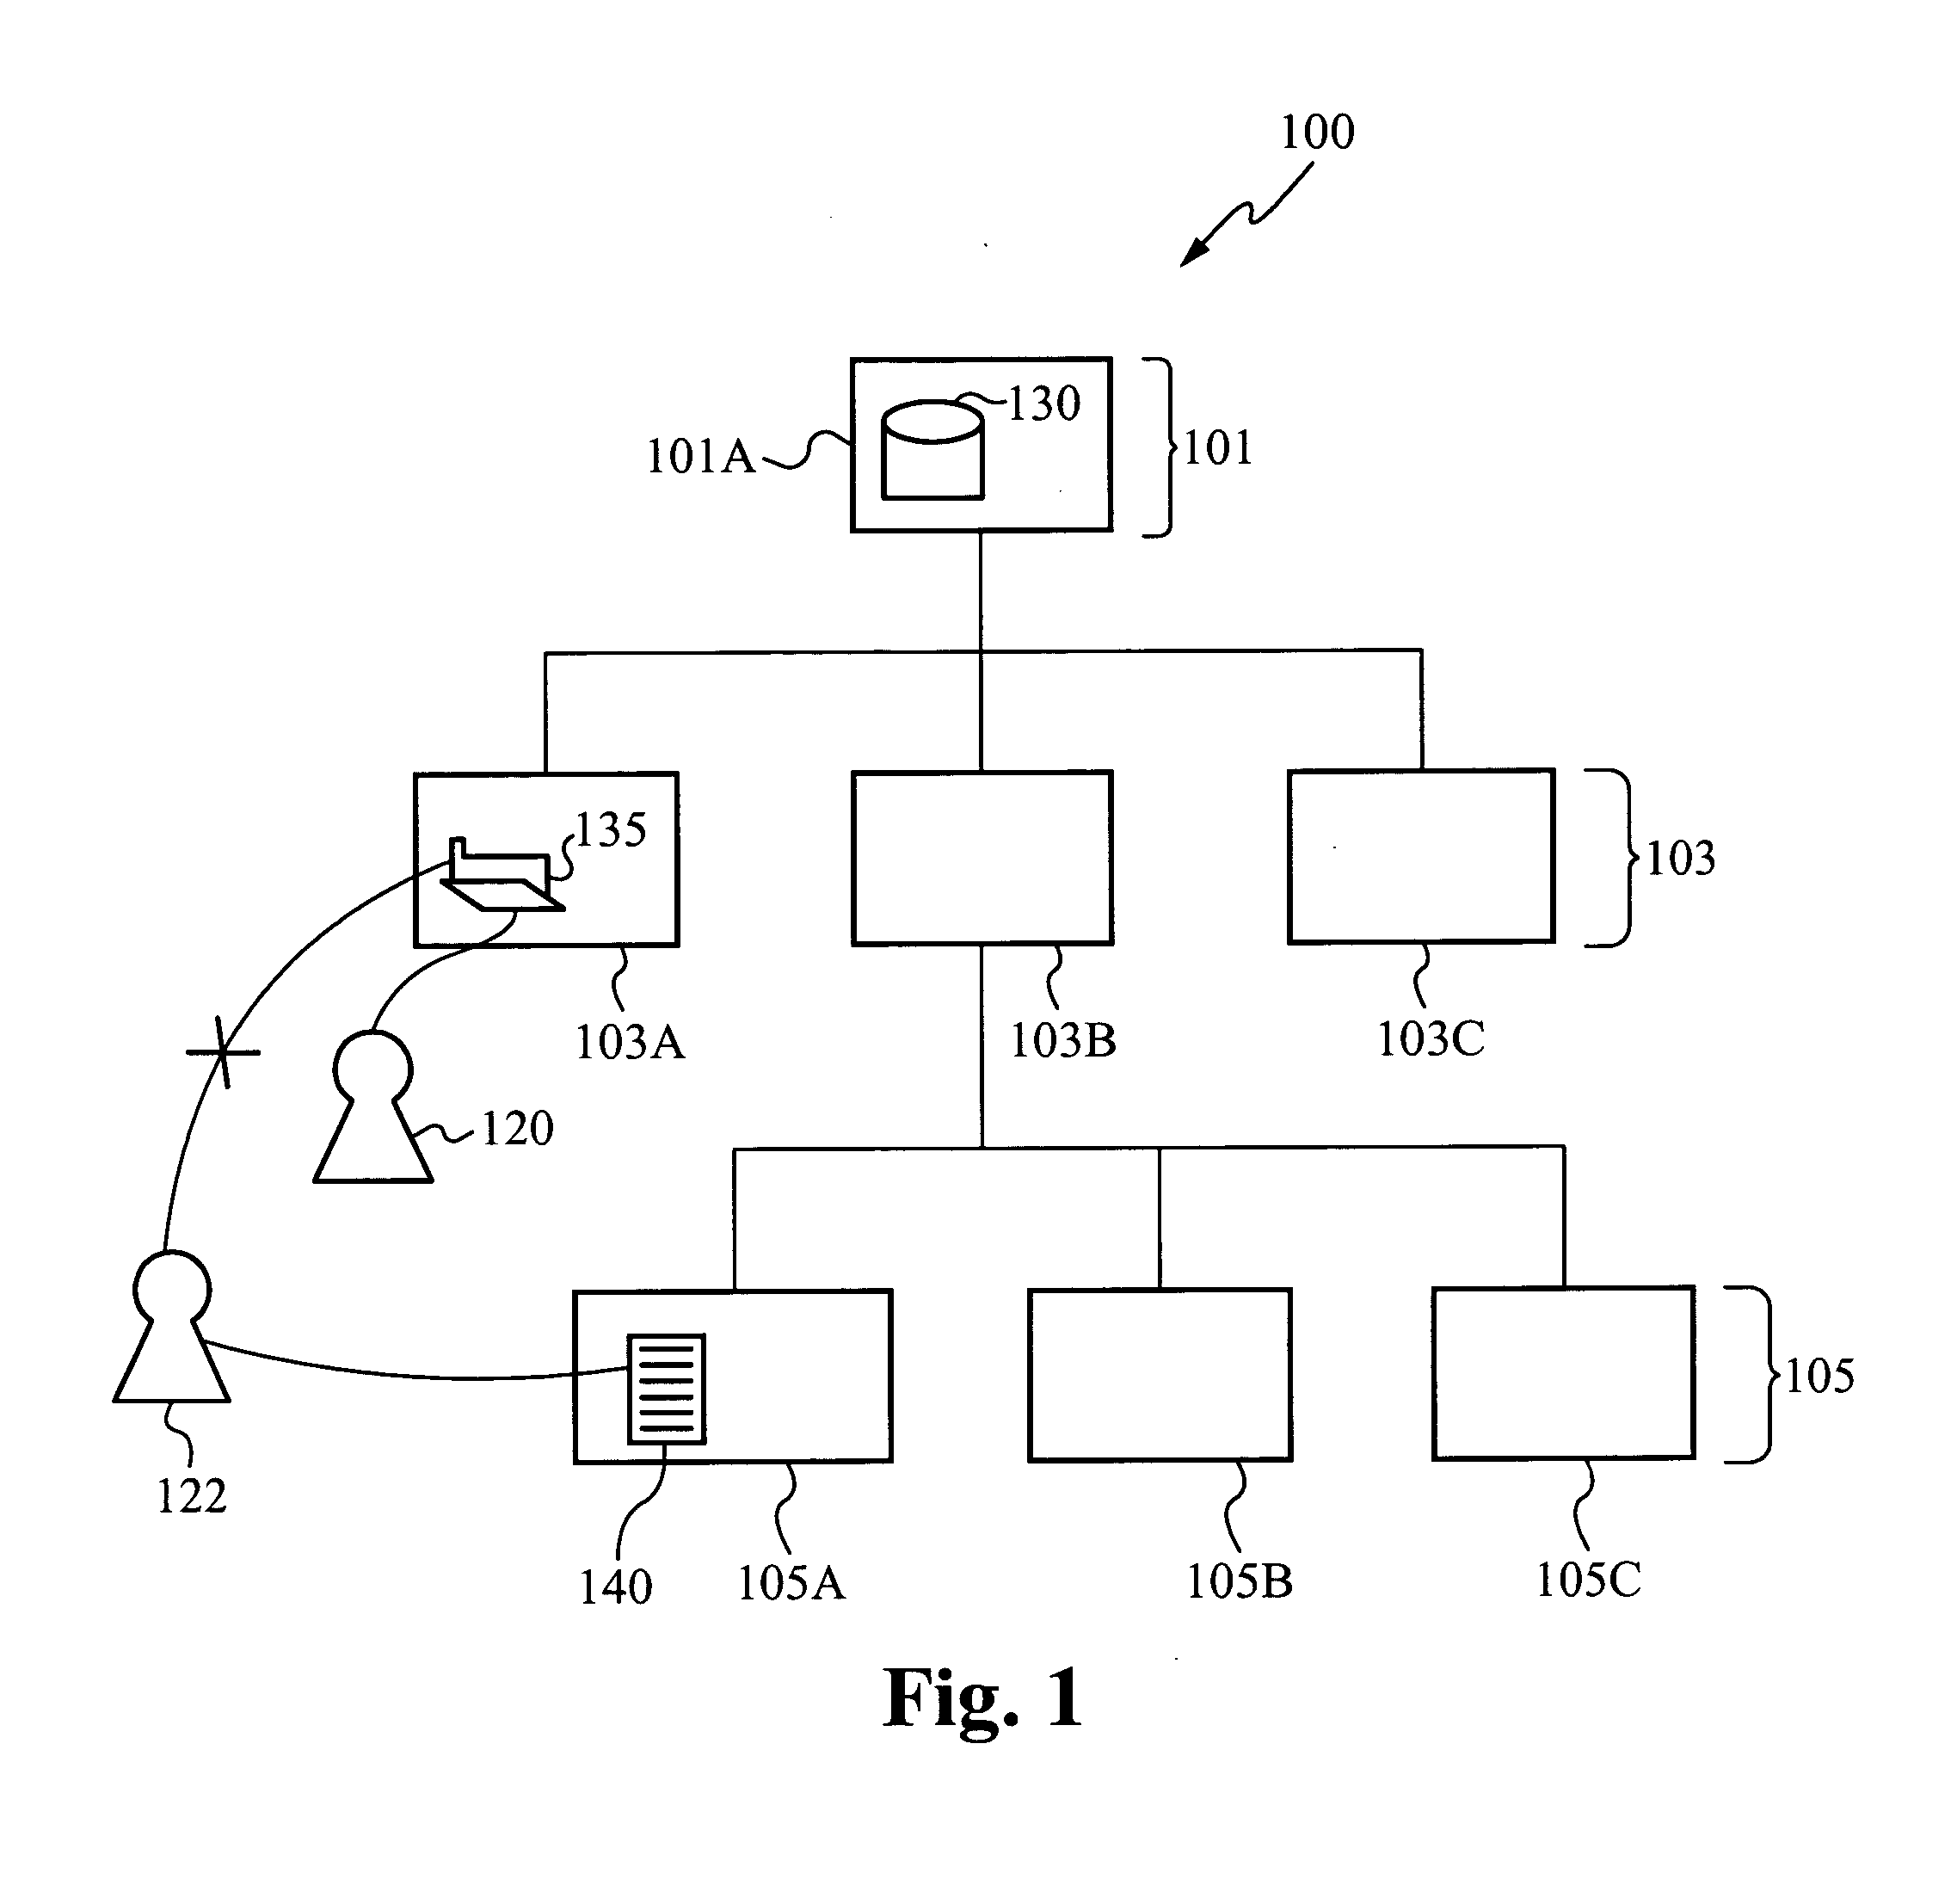 System for and method of managing access to a system using combinations of user information